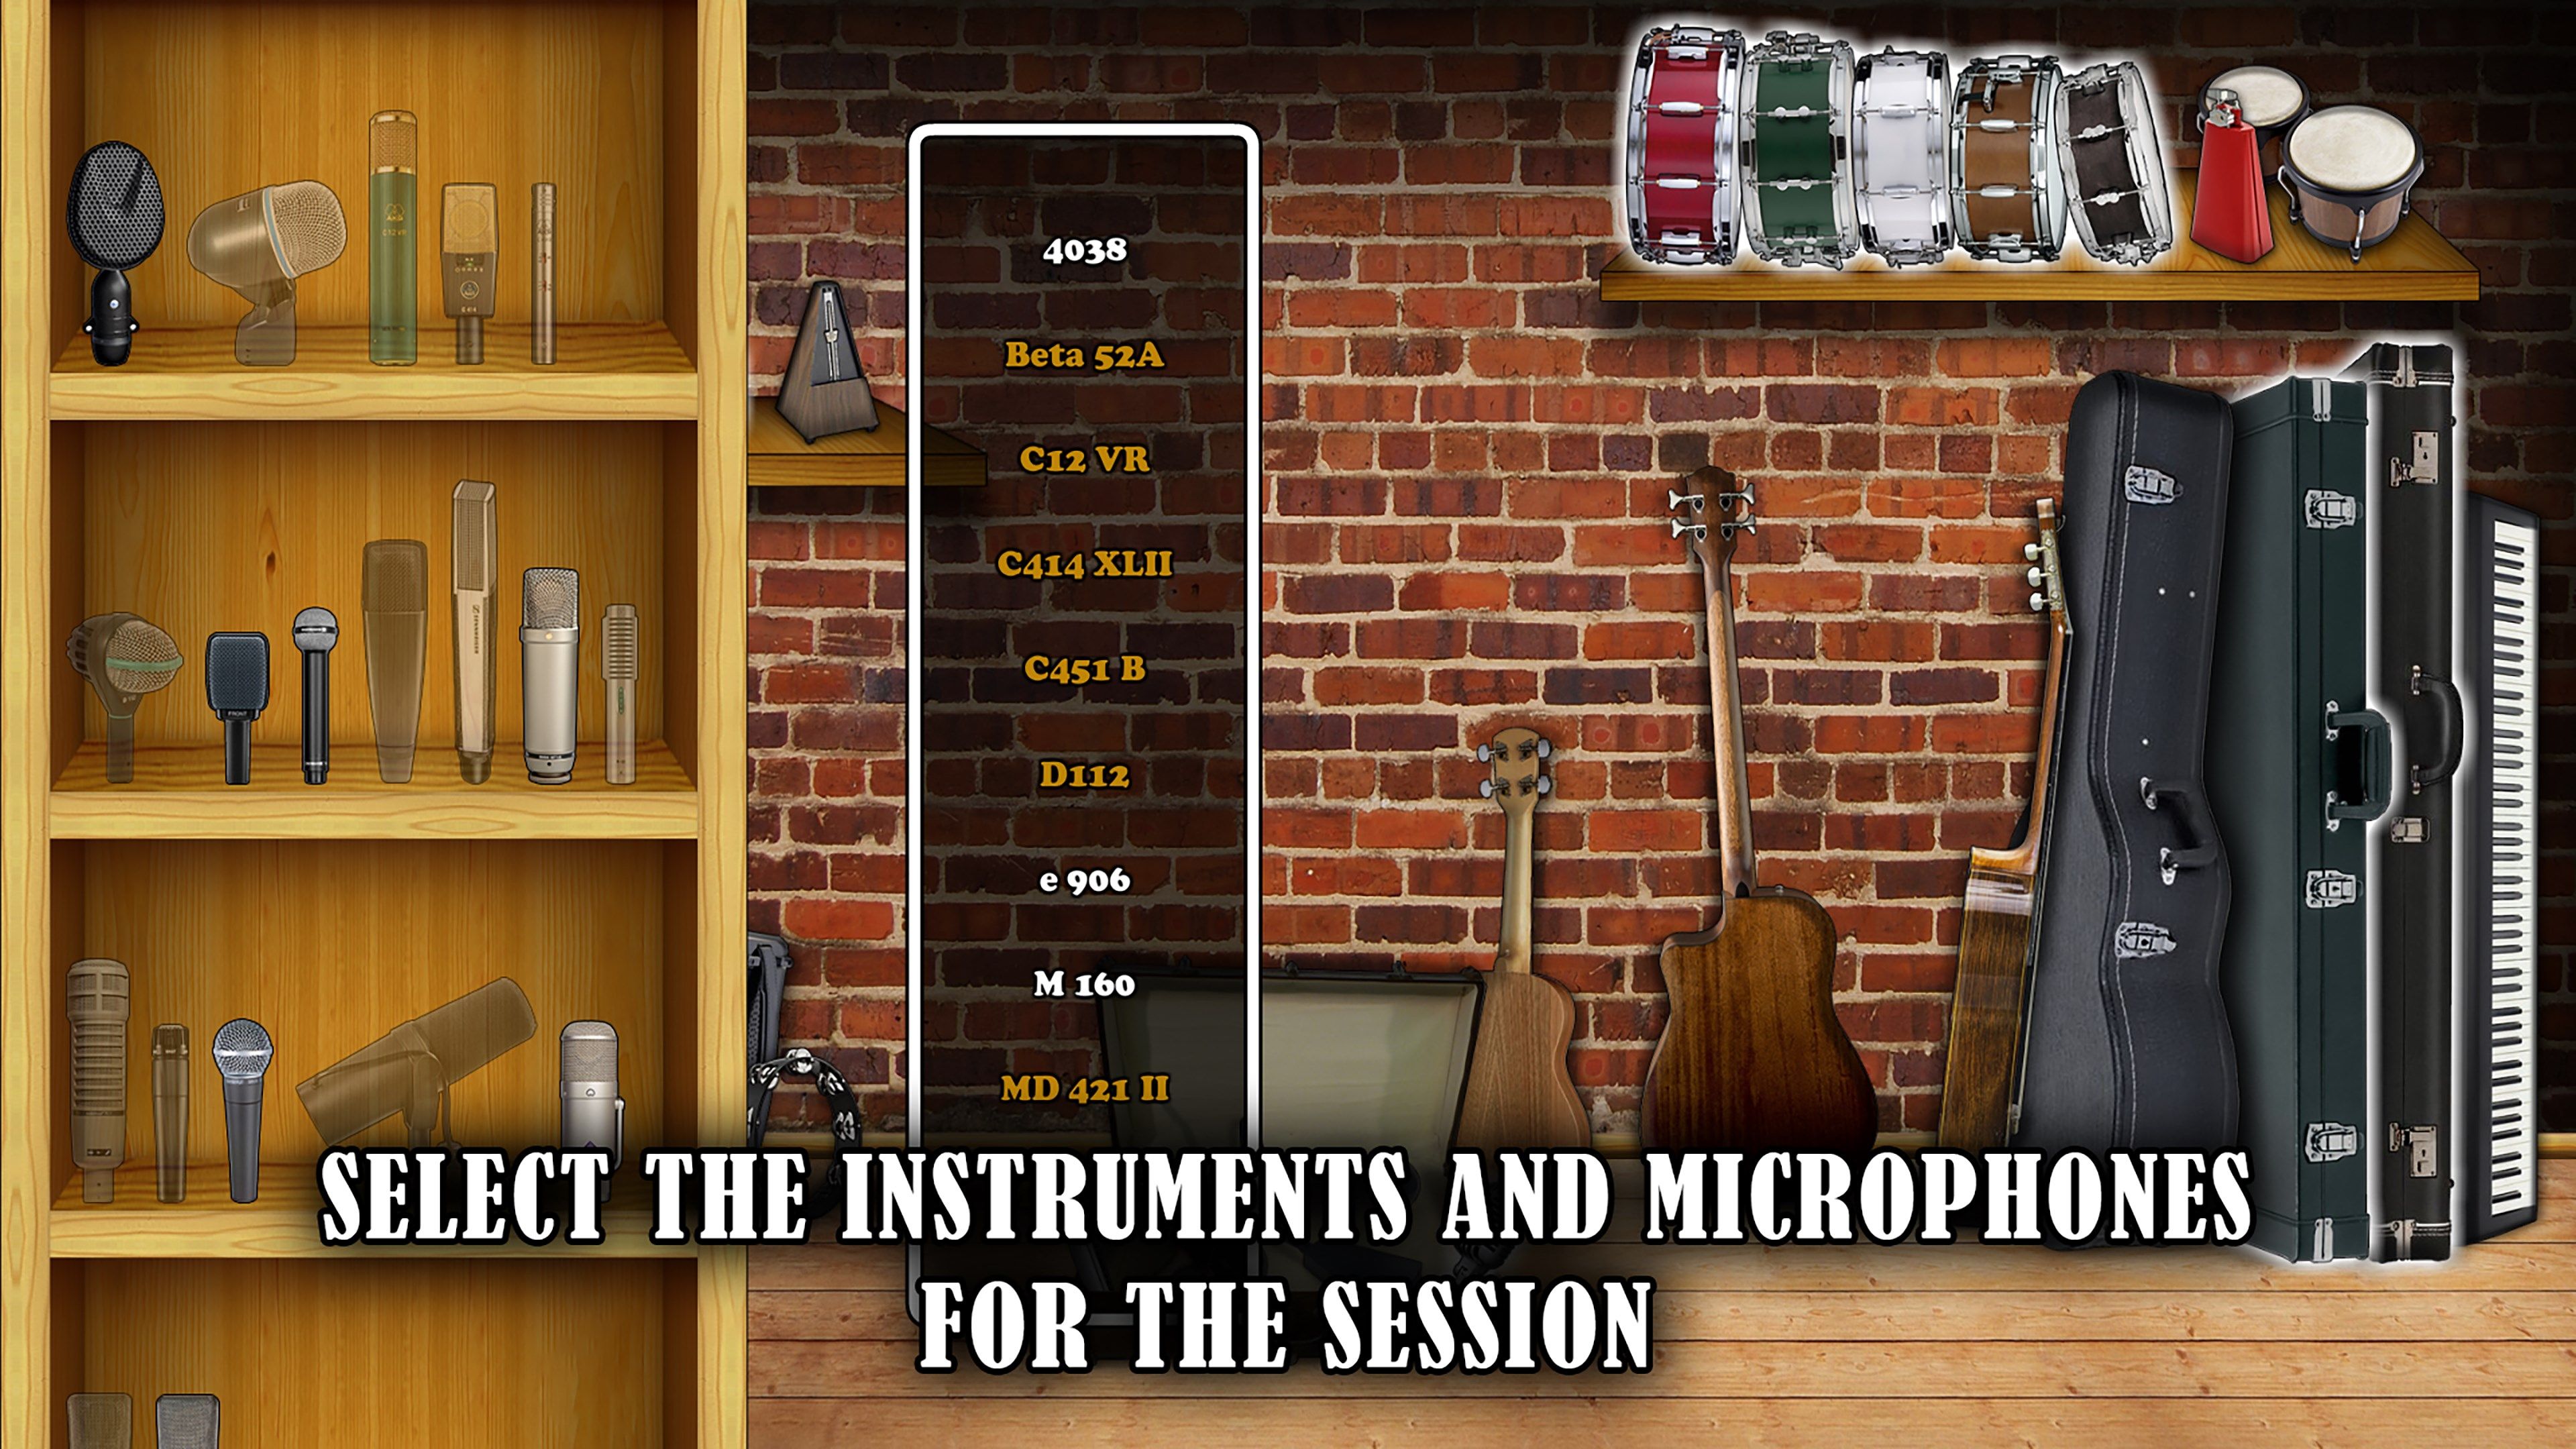 Select the instruments and microphones for the session